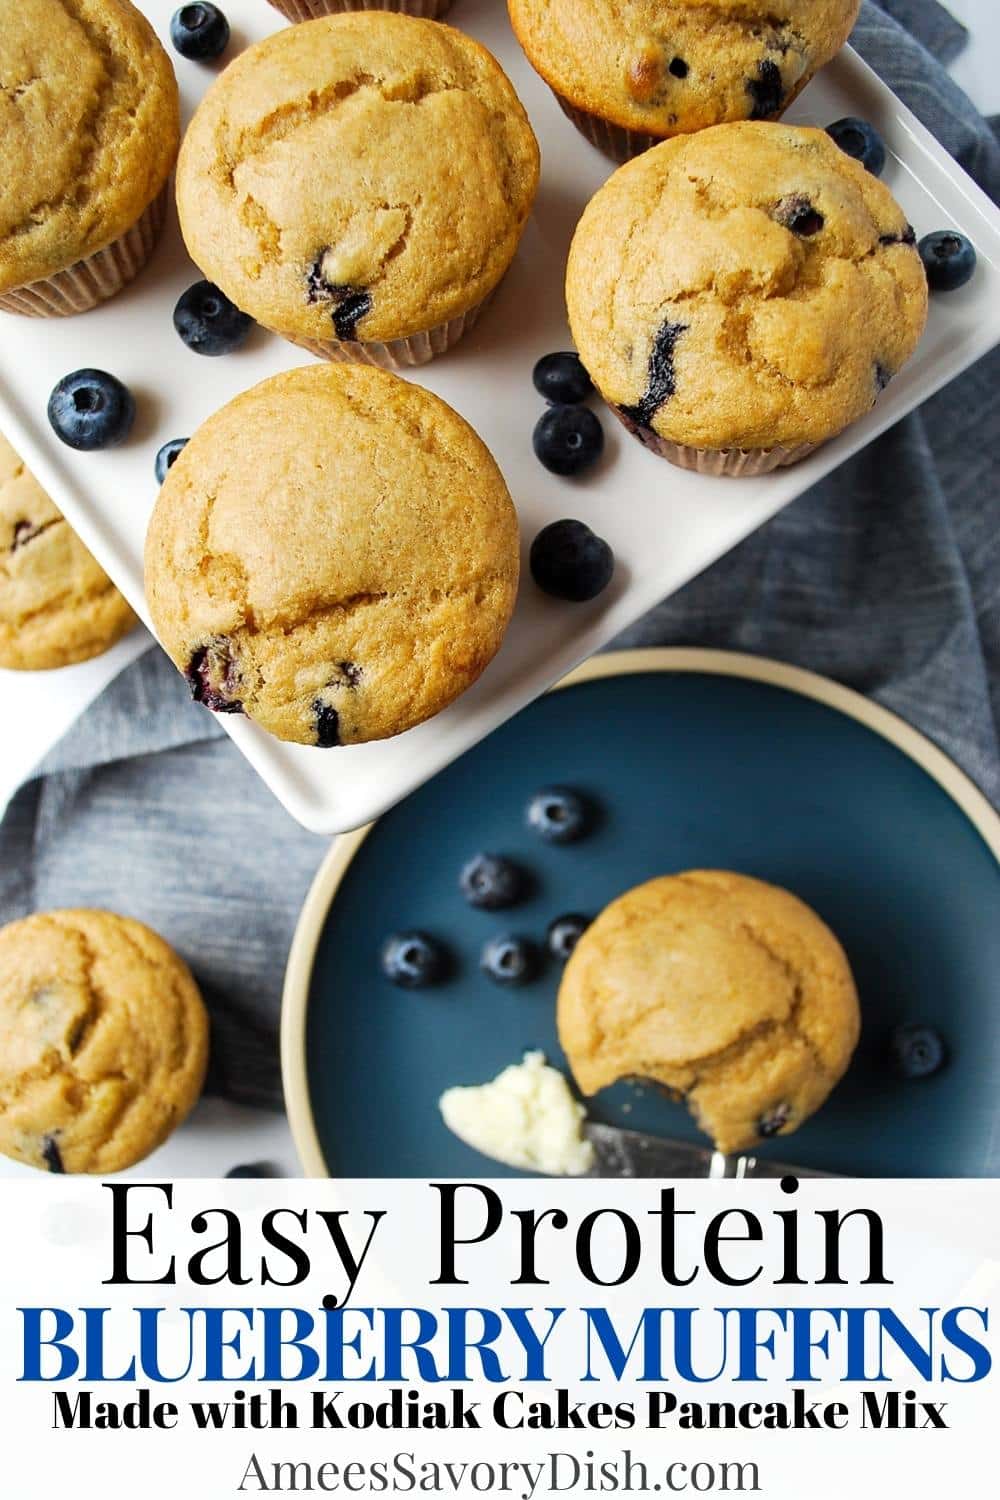 These delicious Protein Blueberry Muffins are quick and easy made with Kodiak flapjack mix, ripe bananas, and maple sugar. via @Ameessavorydish